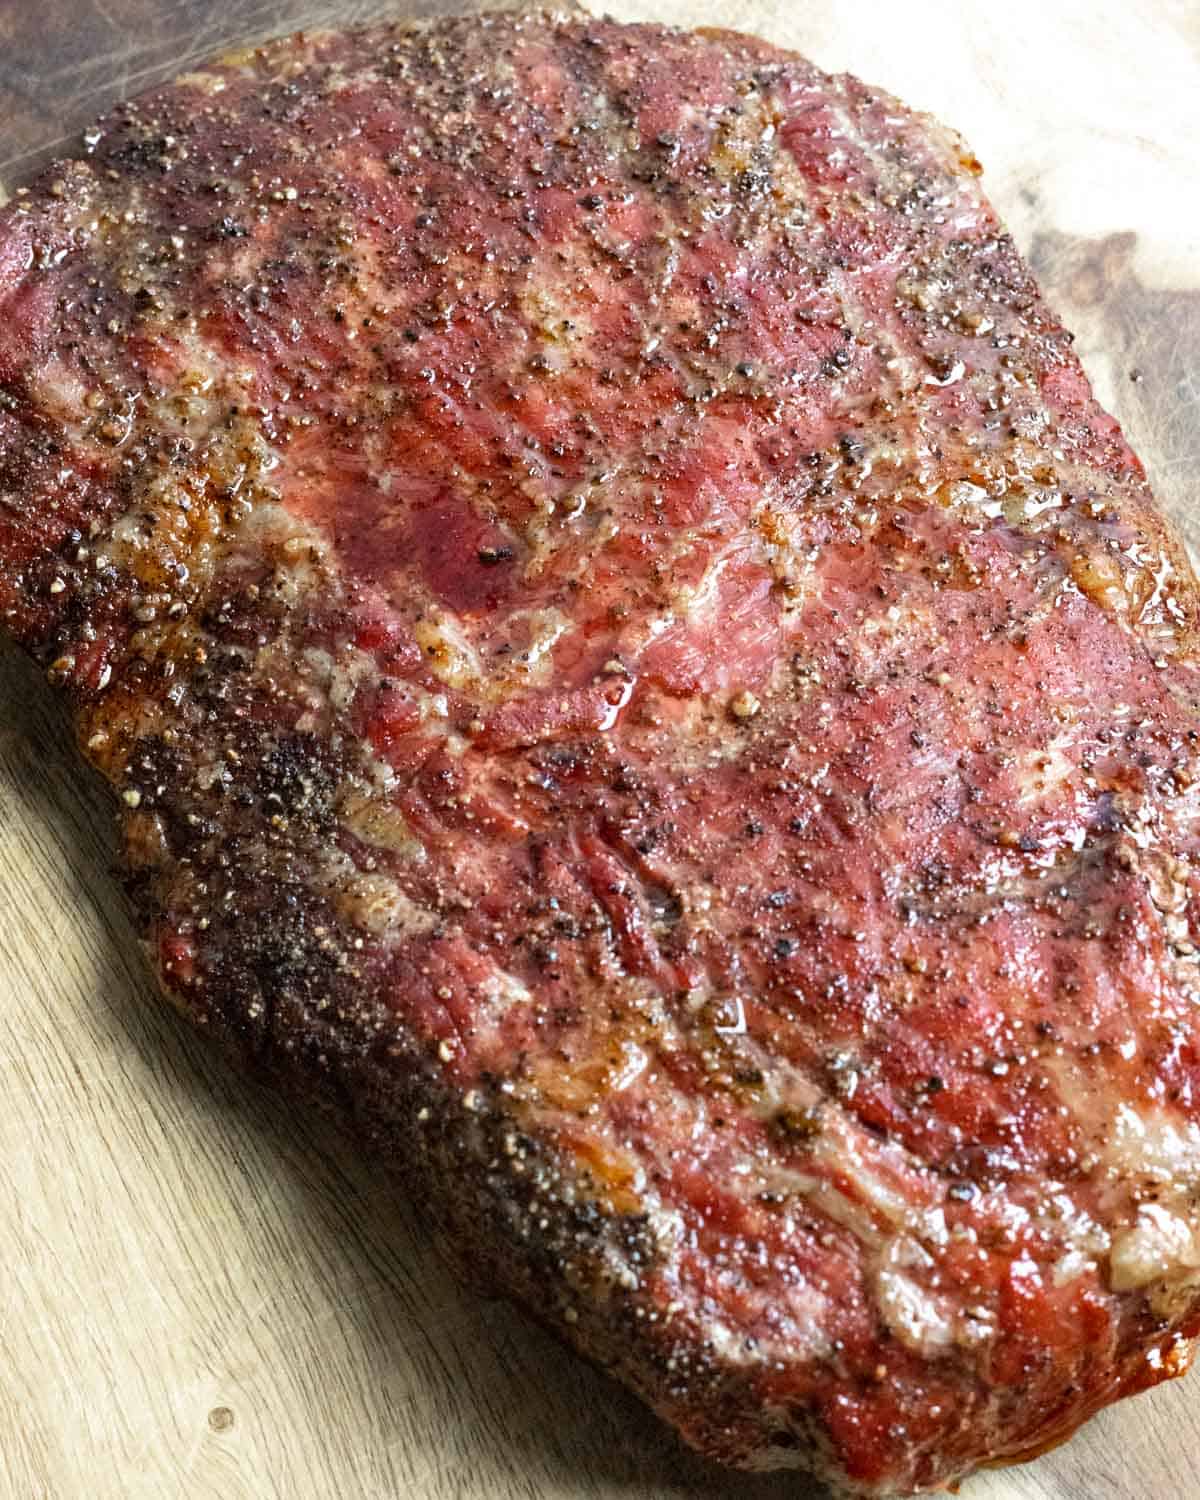 Resting smoked flank steak on a board.